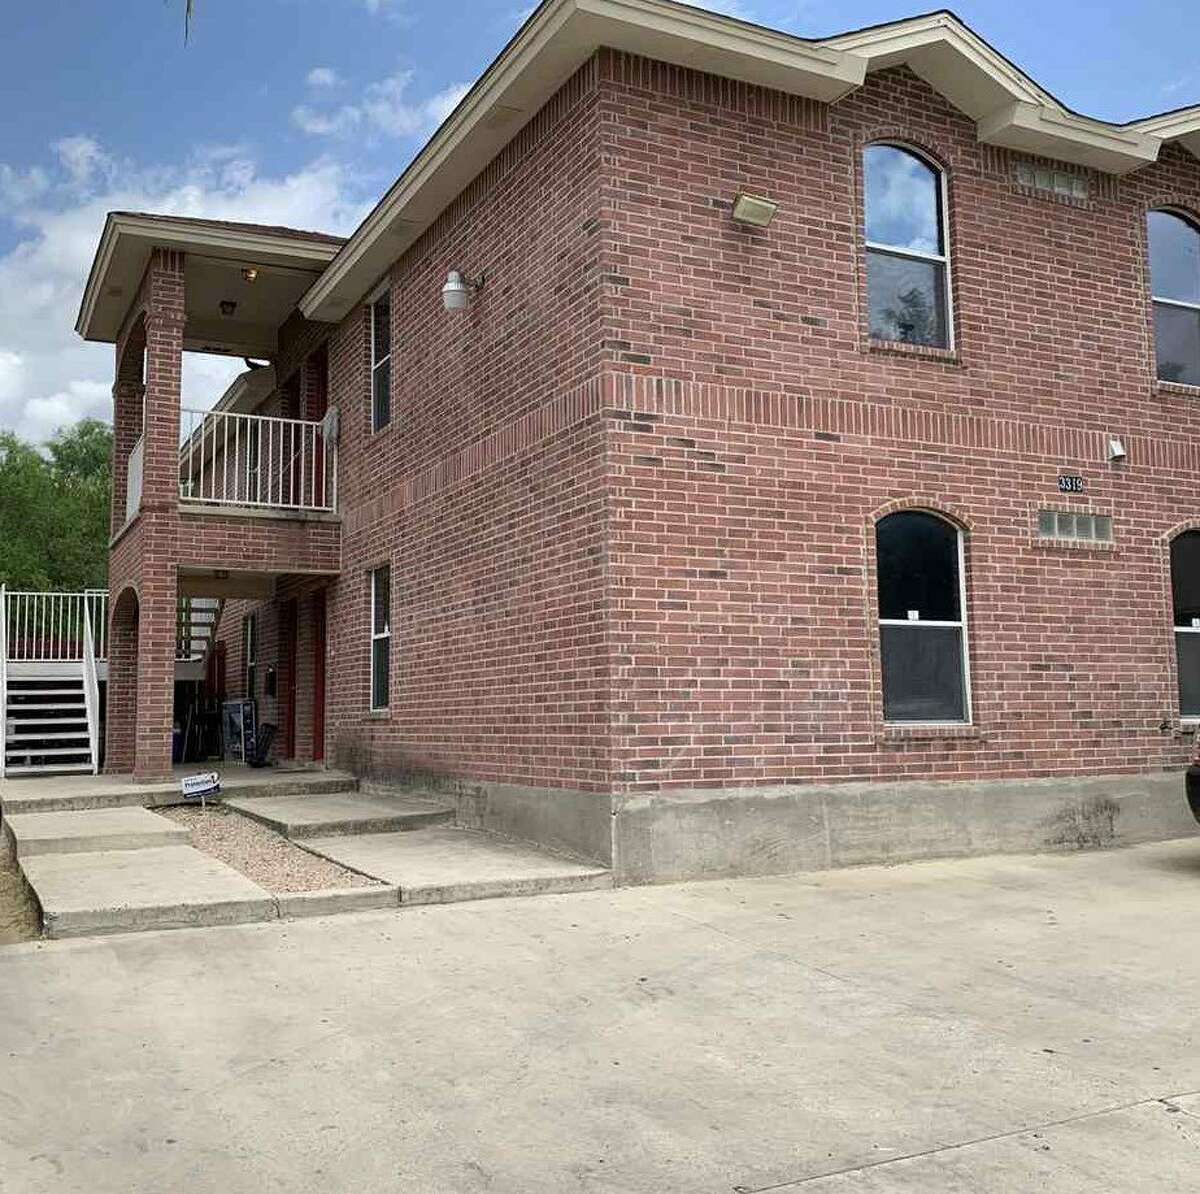 3319 S Bartlett Ave. Click the address for more information $249,900 7,716 Sq.Ft. Great investment opportunity. All units are occupied. Great location, close to shopping centers, schools, restaurants. A must see!!!! Schedule an appointment with your REALTOR today! Ernie Rendon: (956) 286-6692, ernie@txeliterealty.com